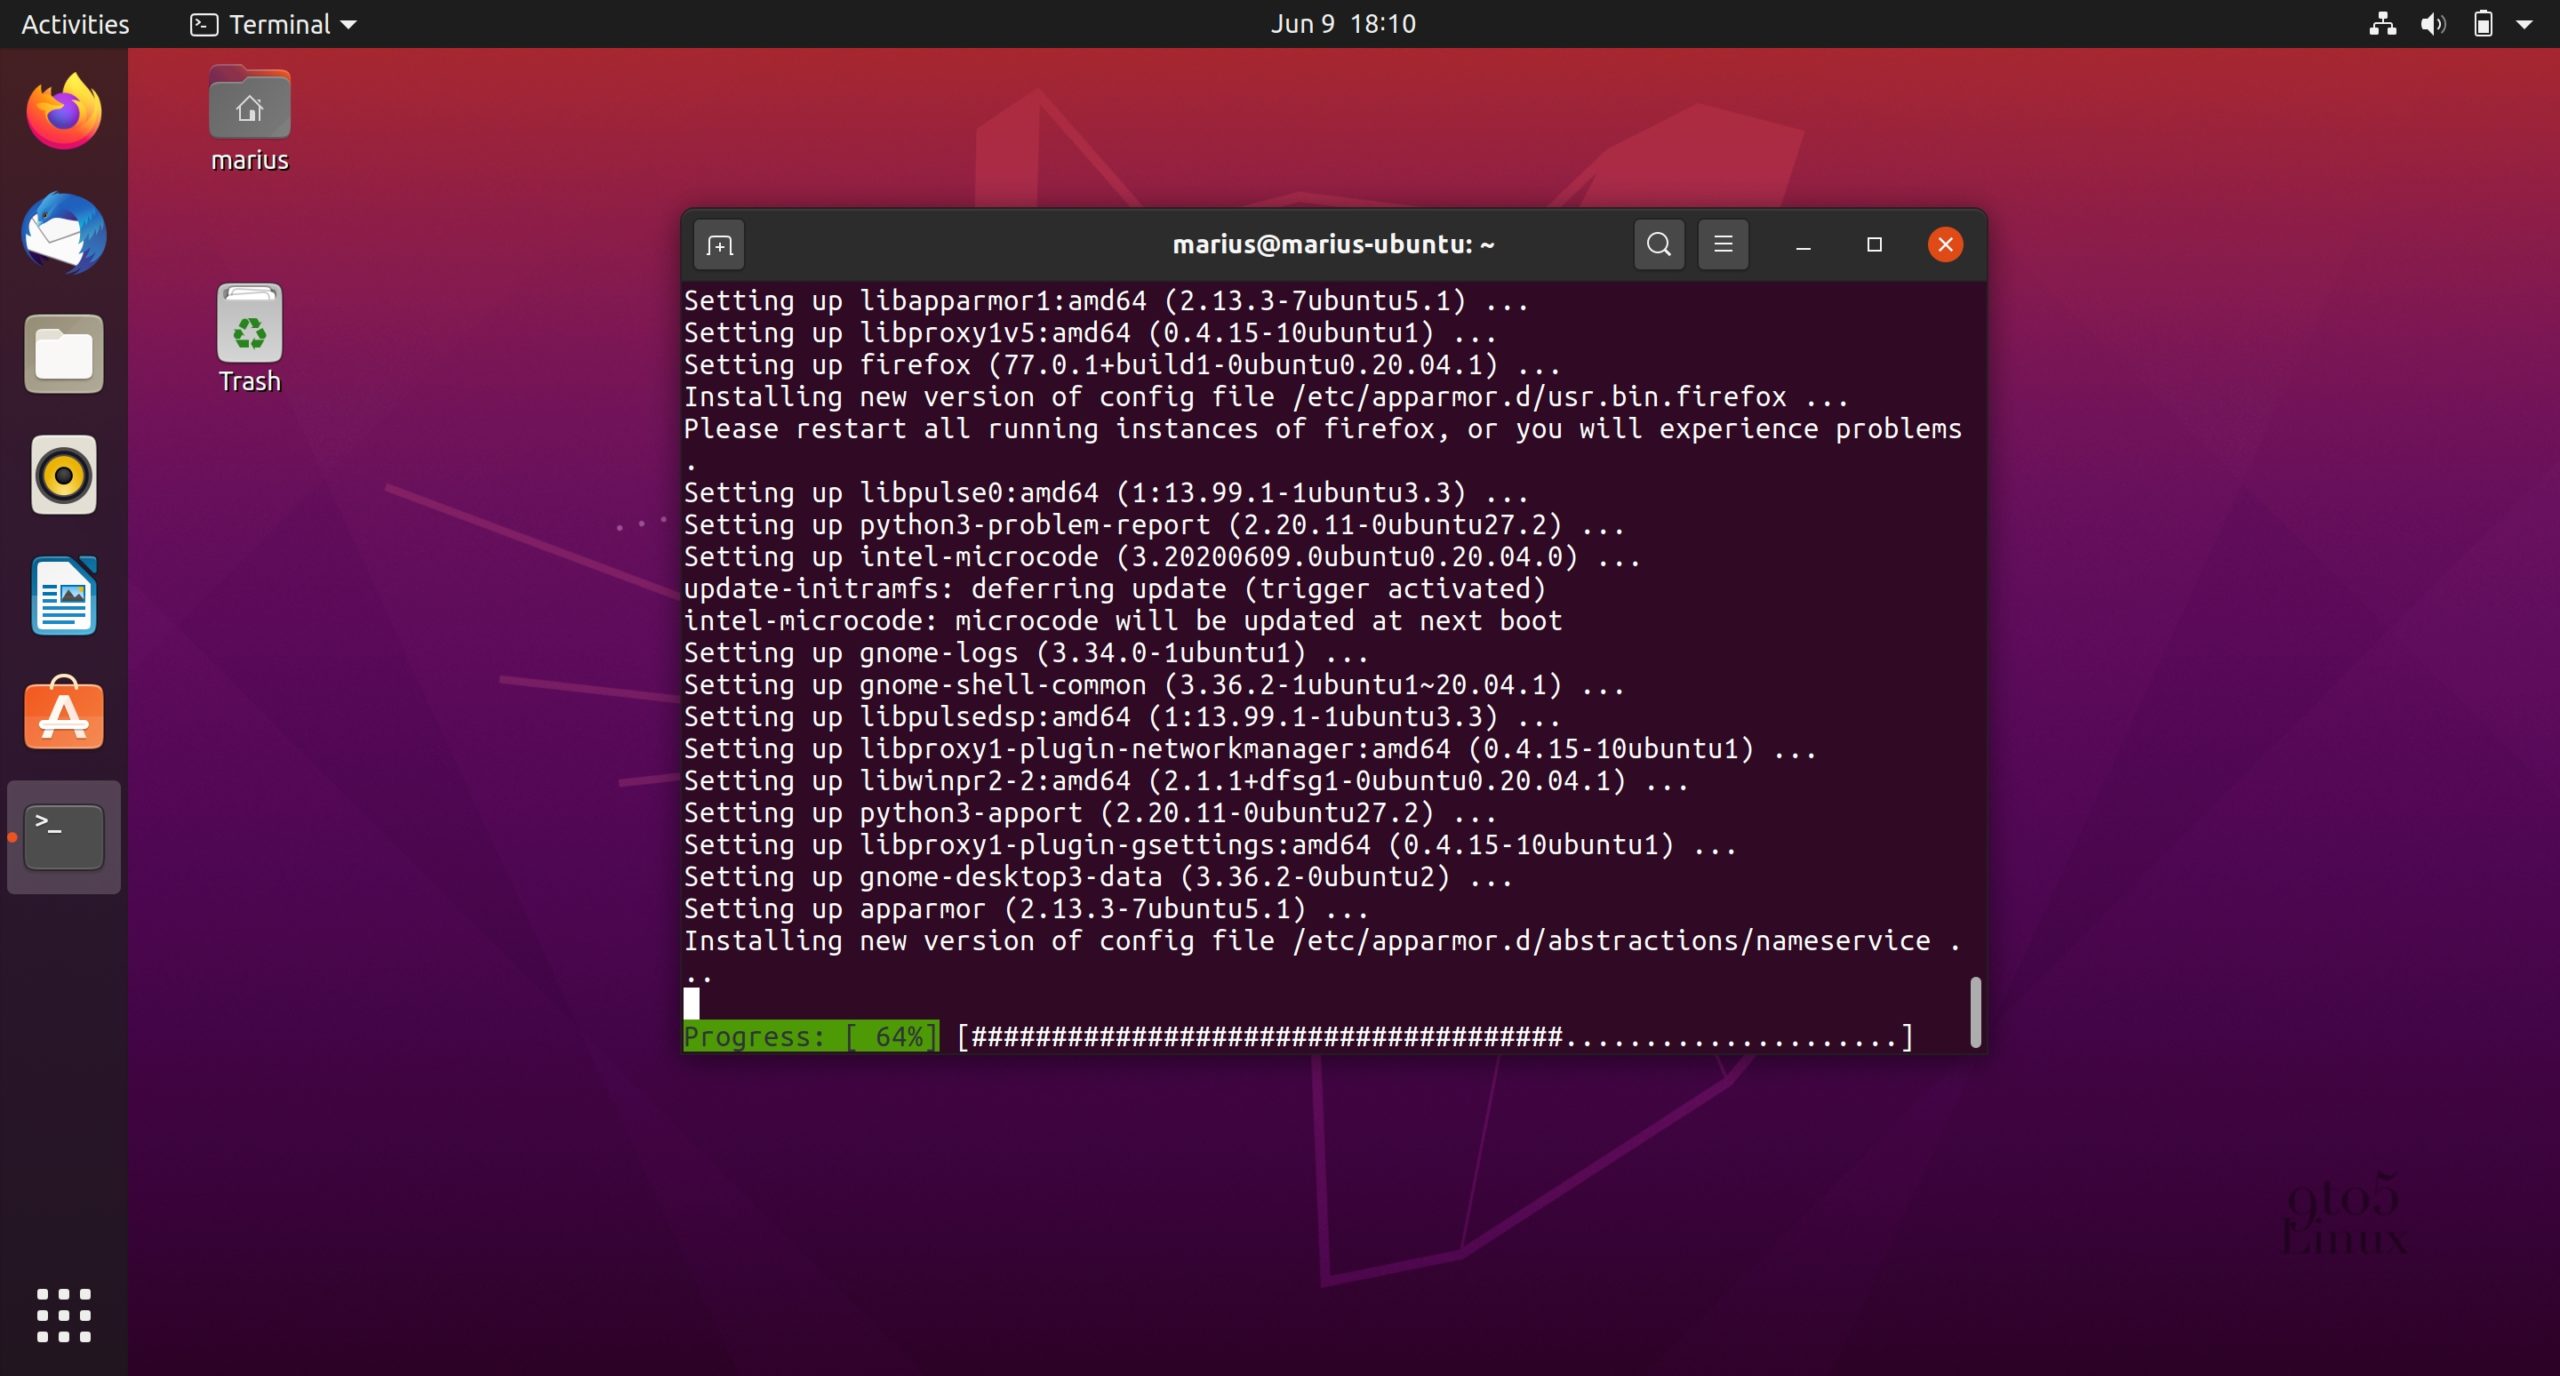 Intel SRBDS/CrossTalk Vulnerabilities Now Patched in All Supported Ubuntu Releases